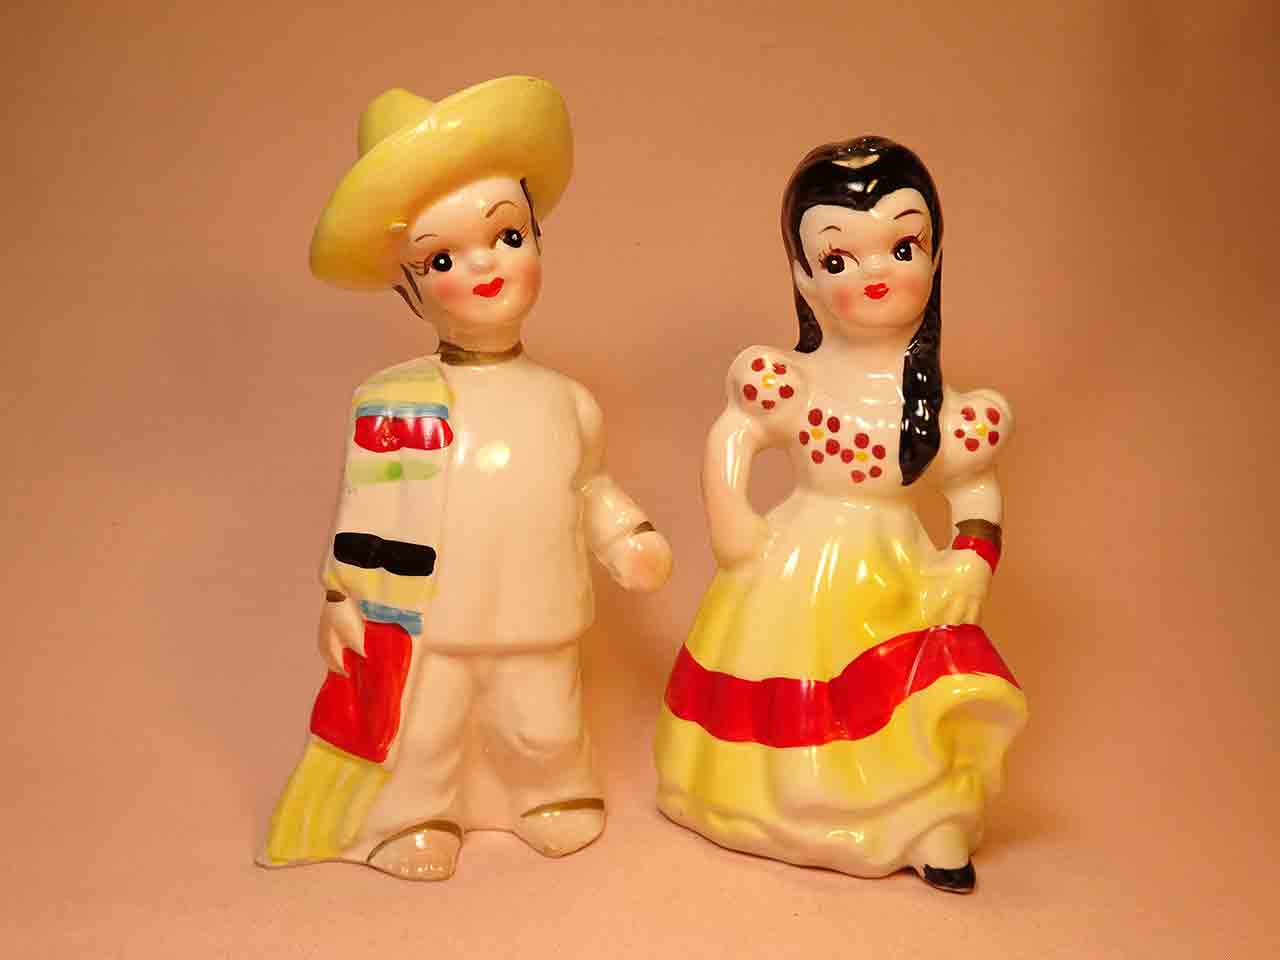 Kreiss Mexico people salt and pepper shakers